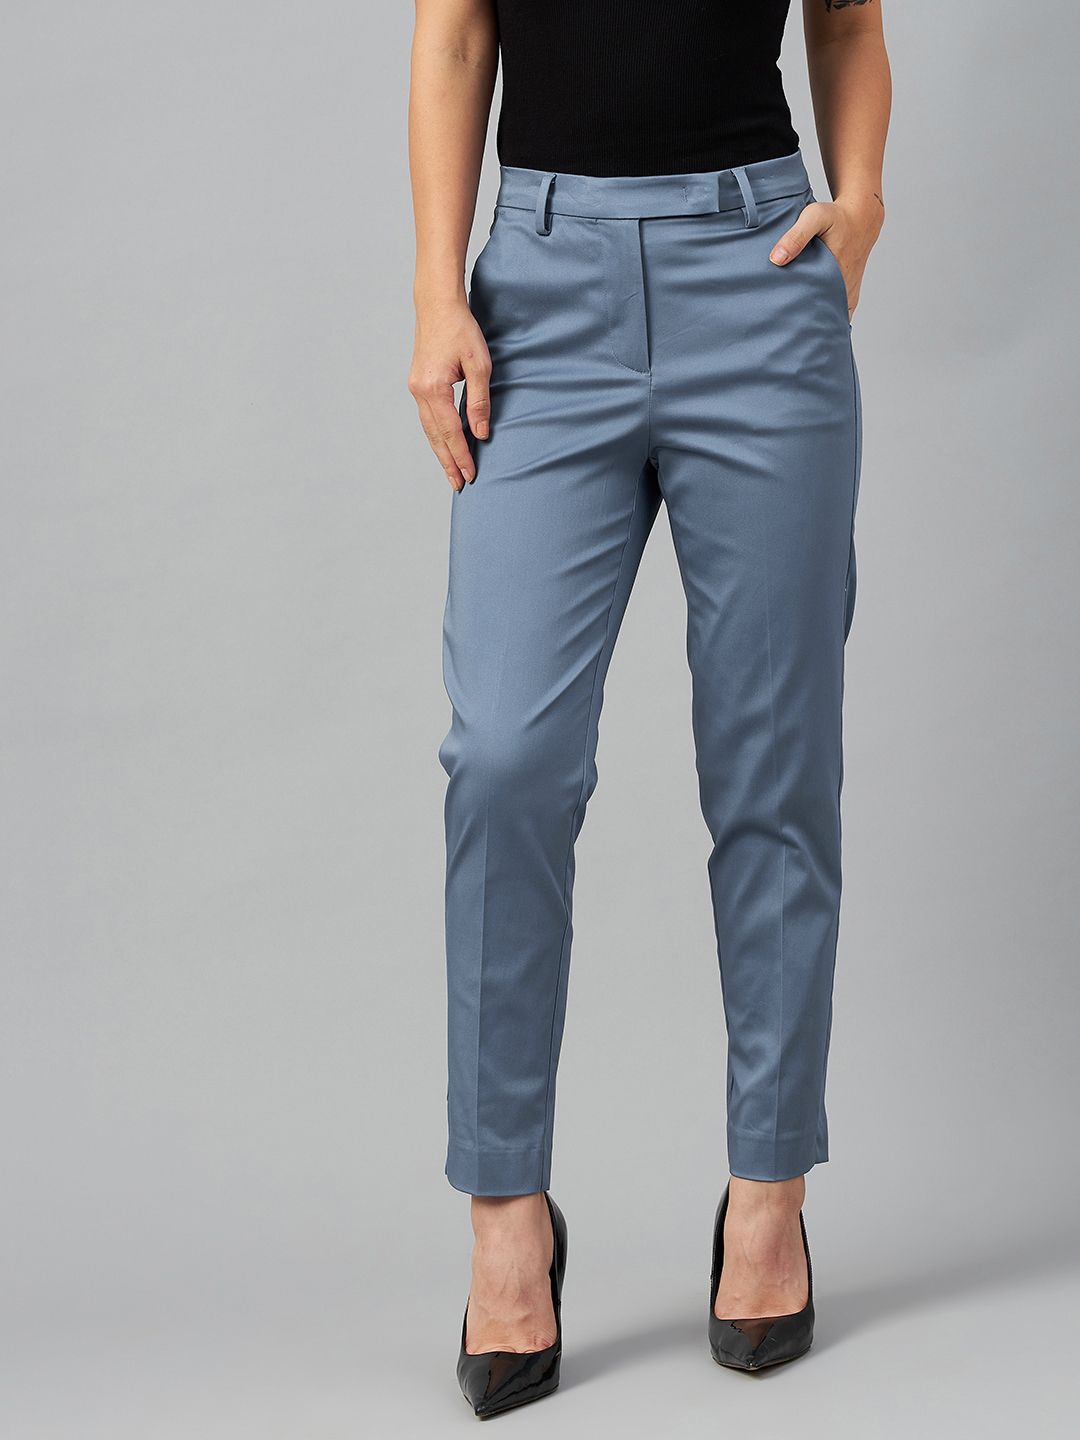 Marks & Spencer Women Blue Slim Fit High-Rise Trousers Price in India